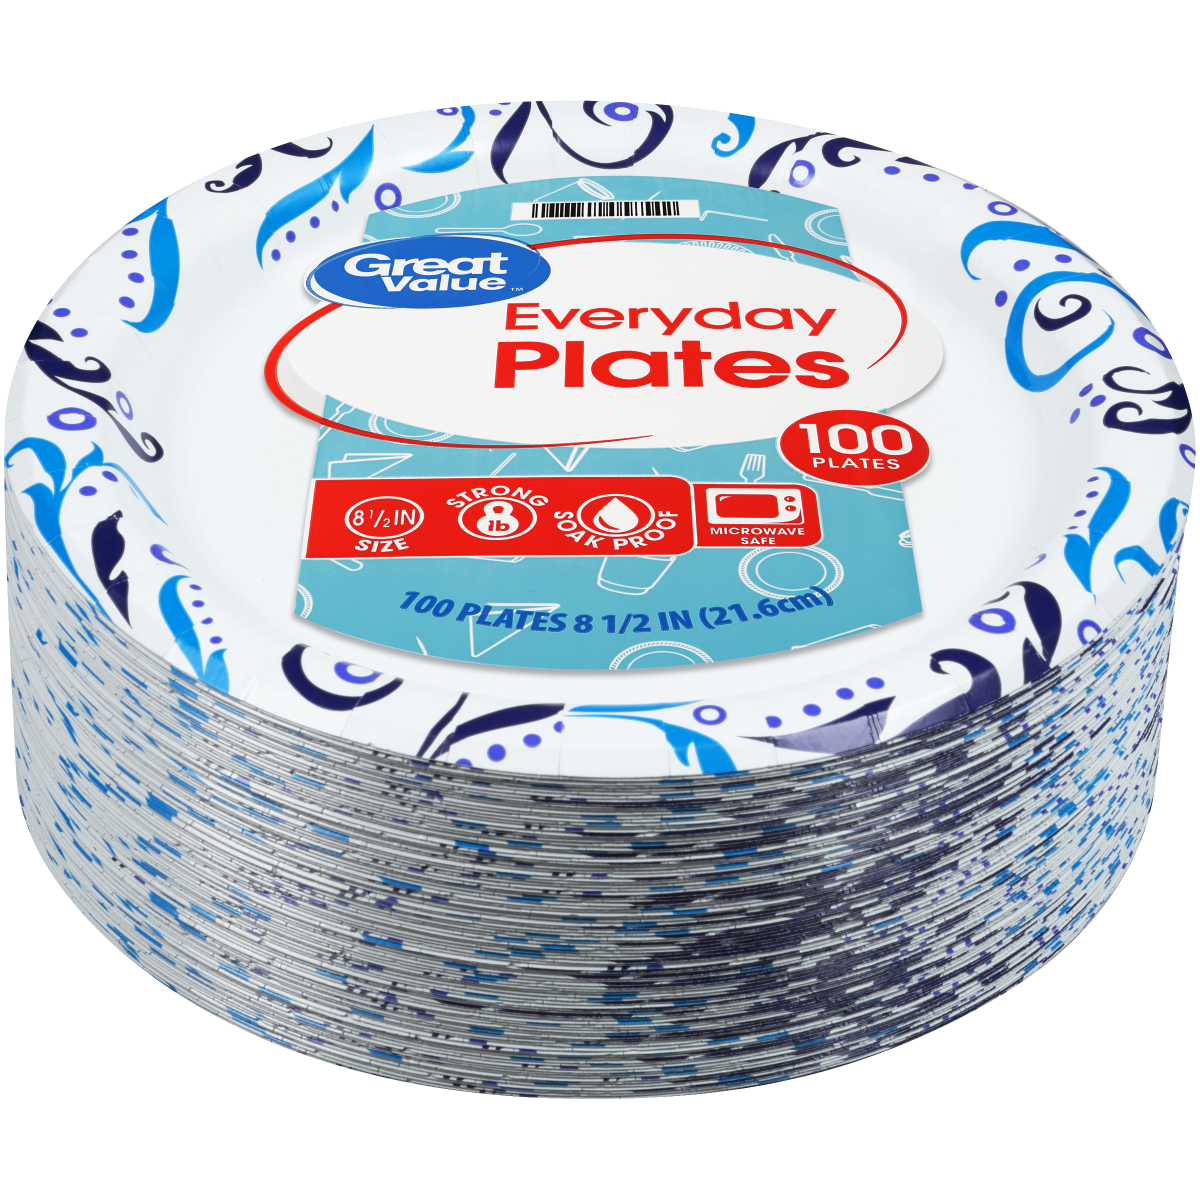 Great Value Everyday Strong, Soak Proof, Microwave Safe, Disposable Paper Lunch Plates, 9 in, 100 Plates, Patterned - image 4 of 9